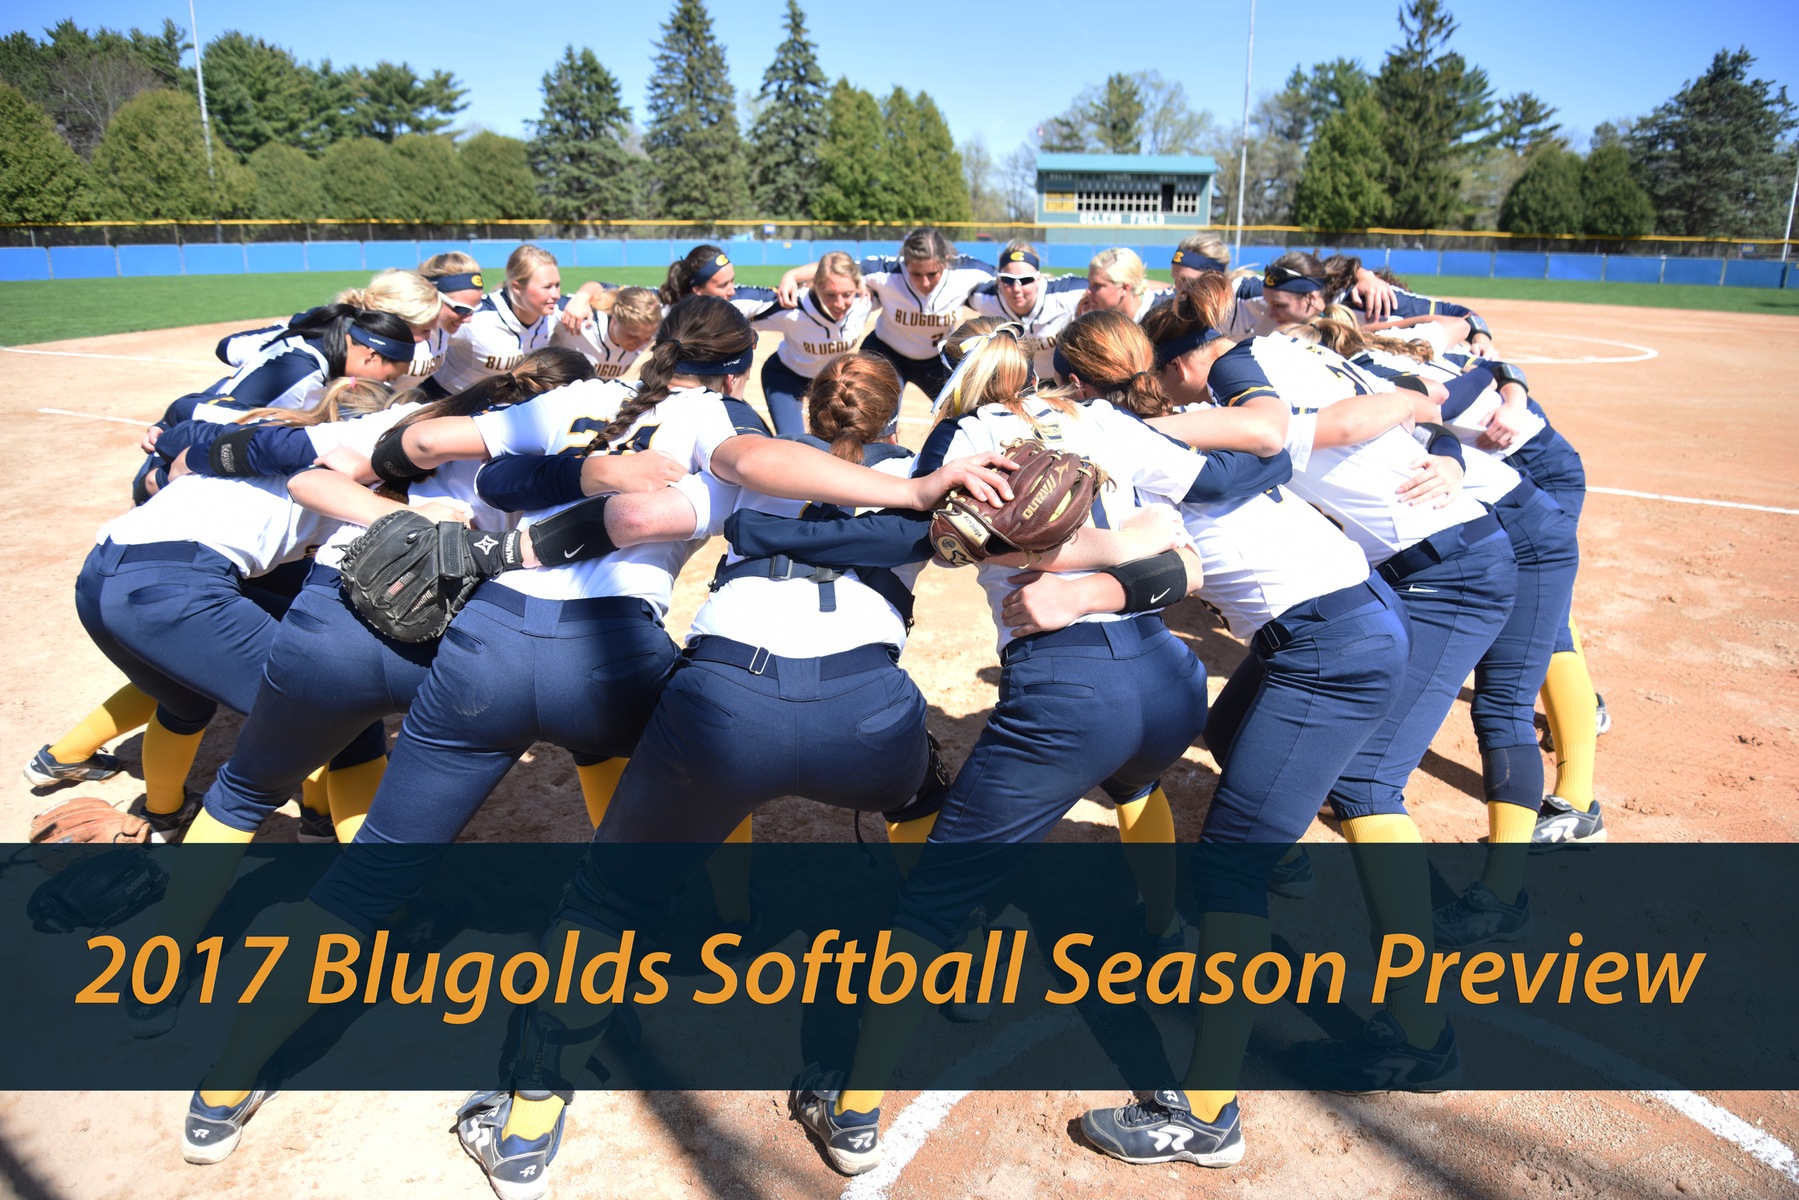 Season Preview: Blugolds Softball Ready to 'Make It Count' in 2017